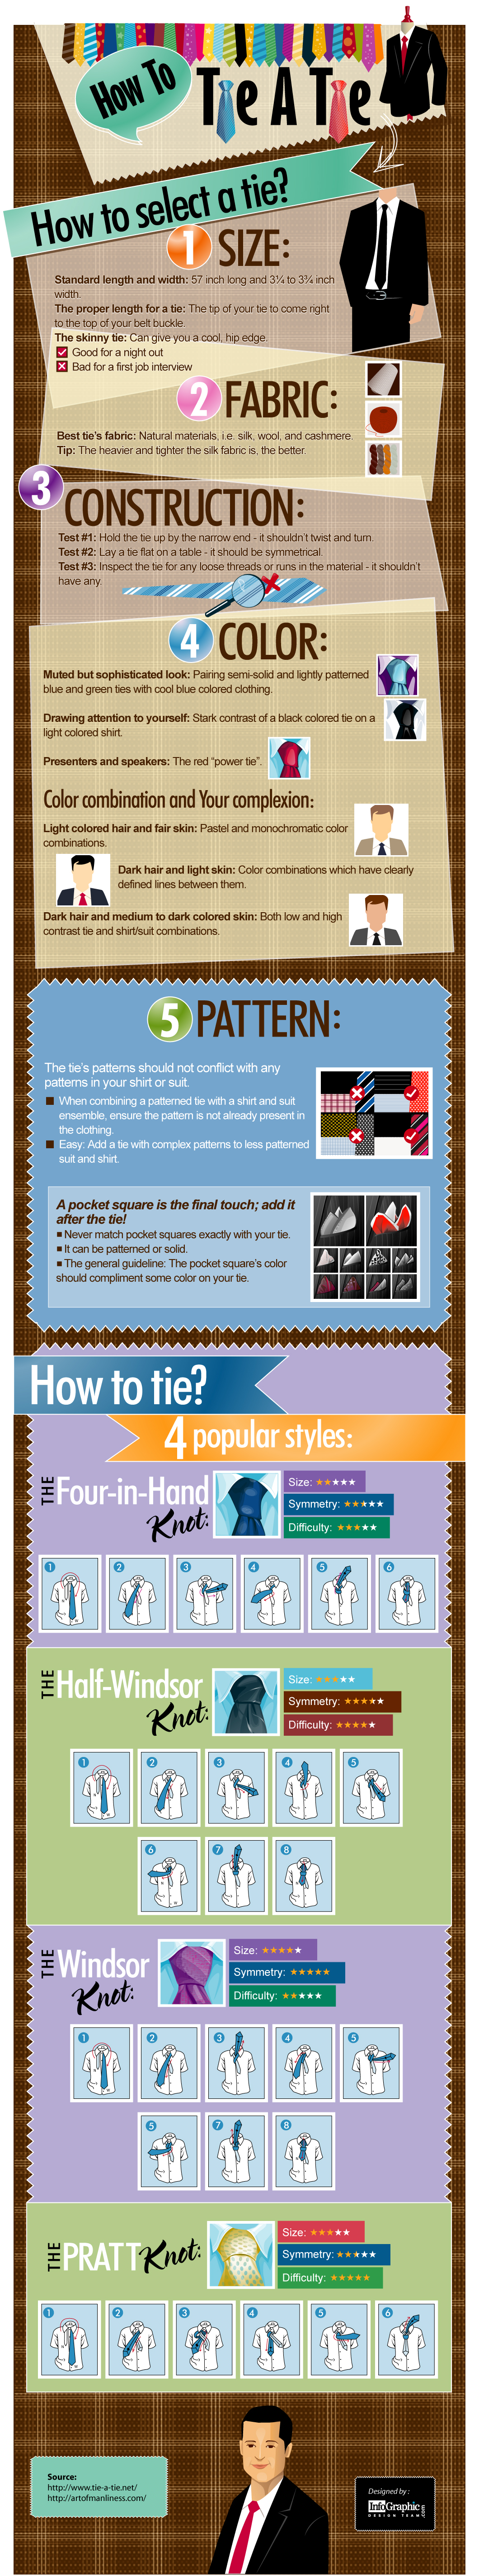 How to tie a tie - infographic